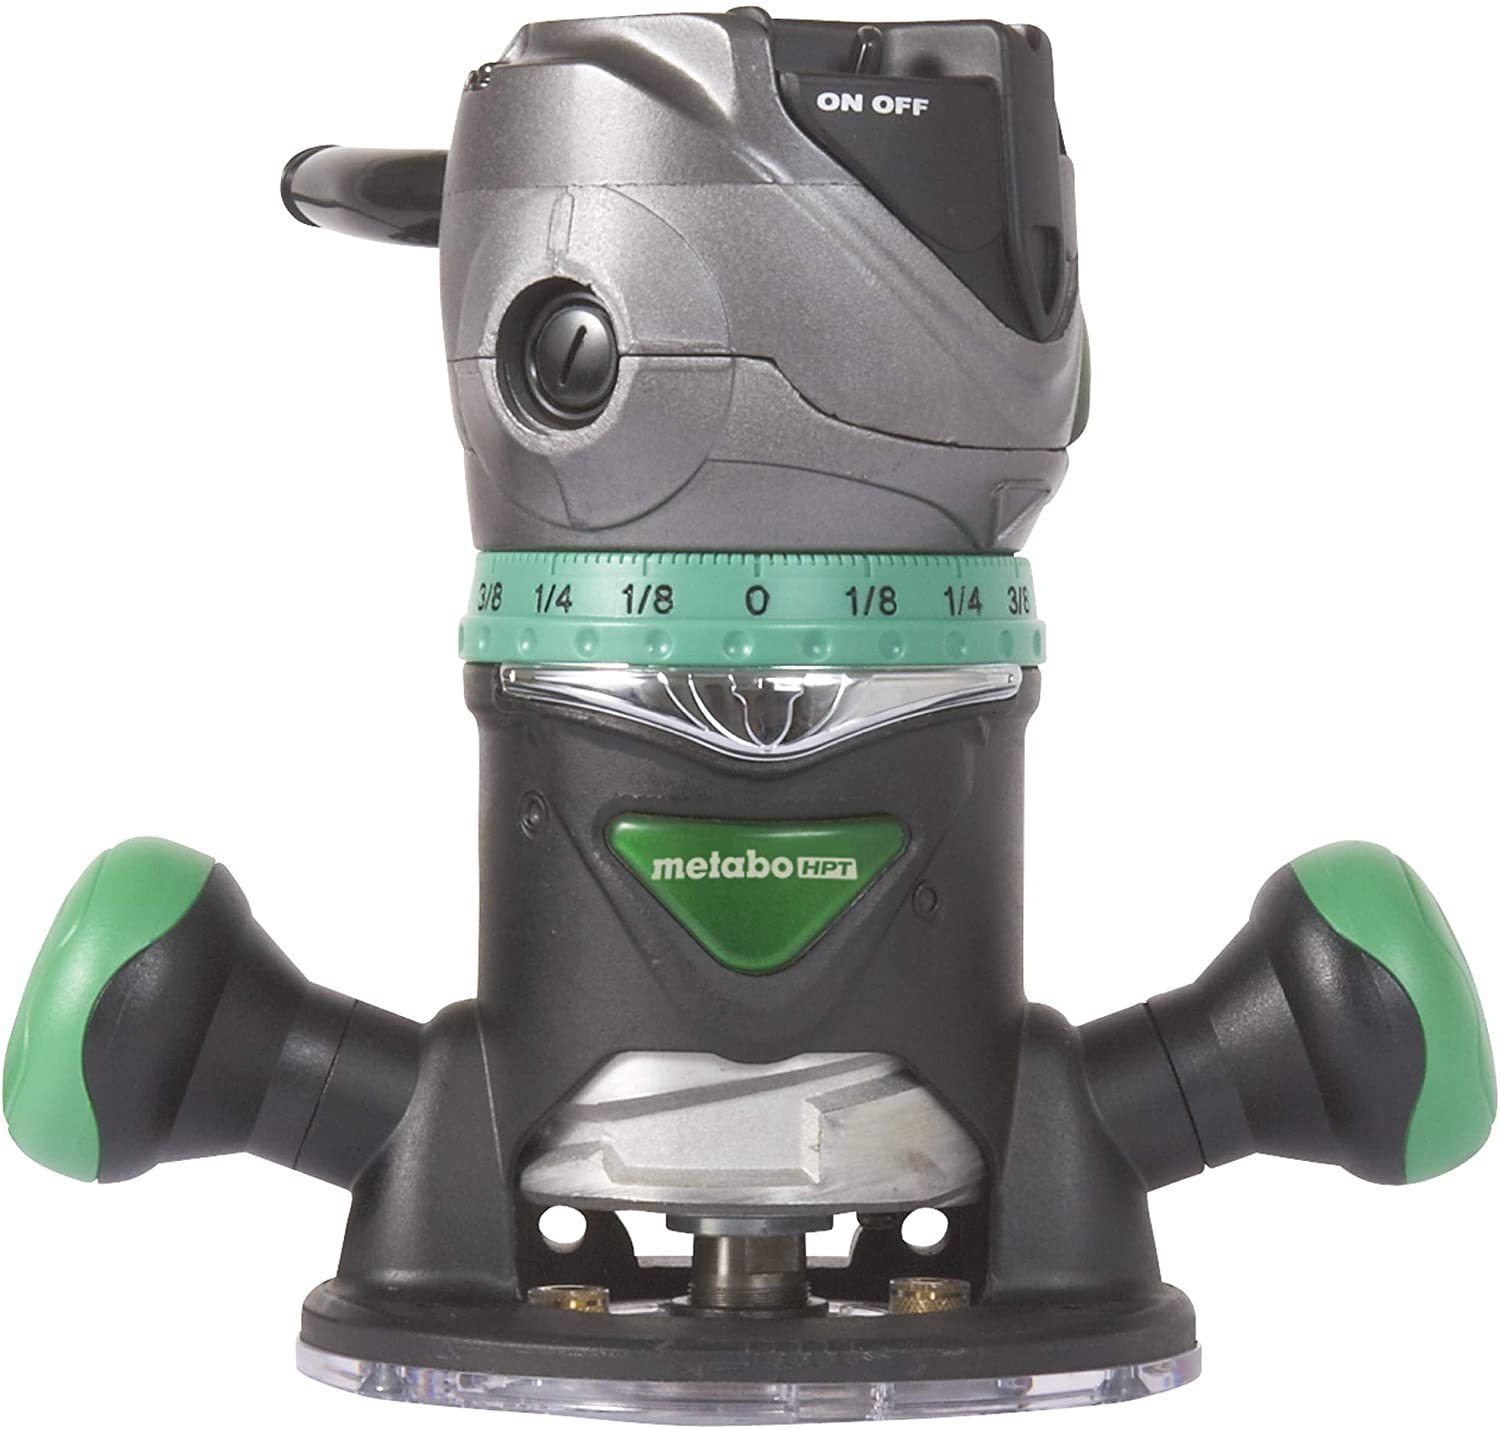 Metabo M12VC HPT Corded Router $69 + free s/h at Amazon